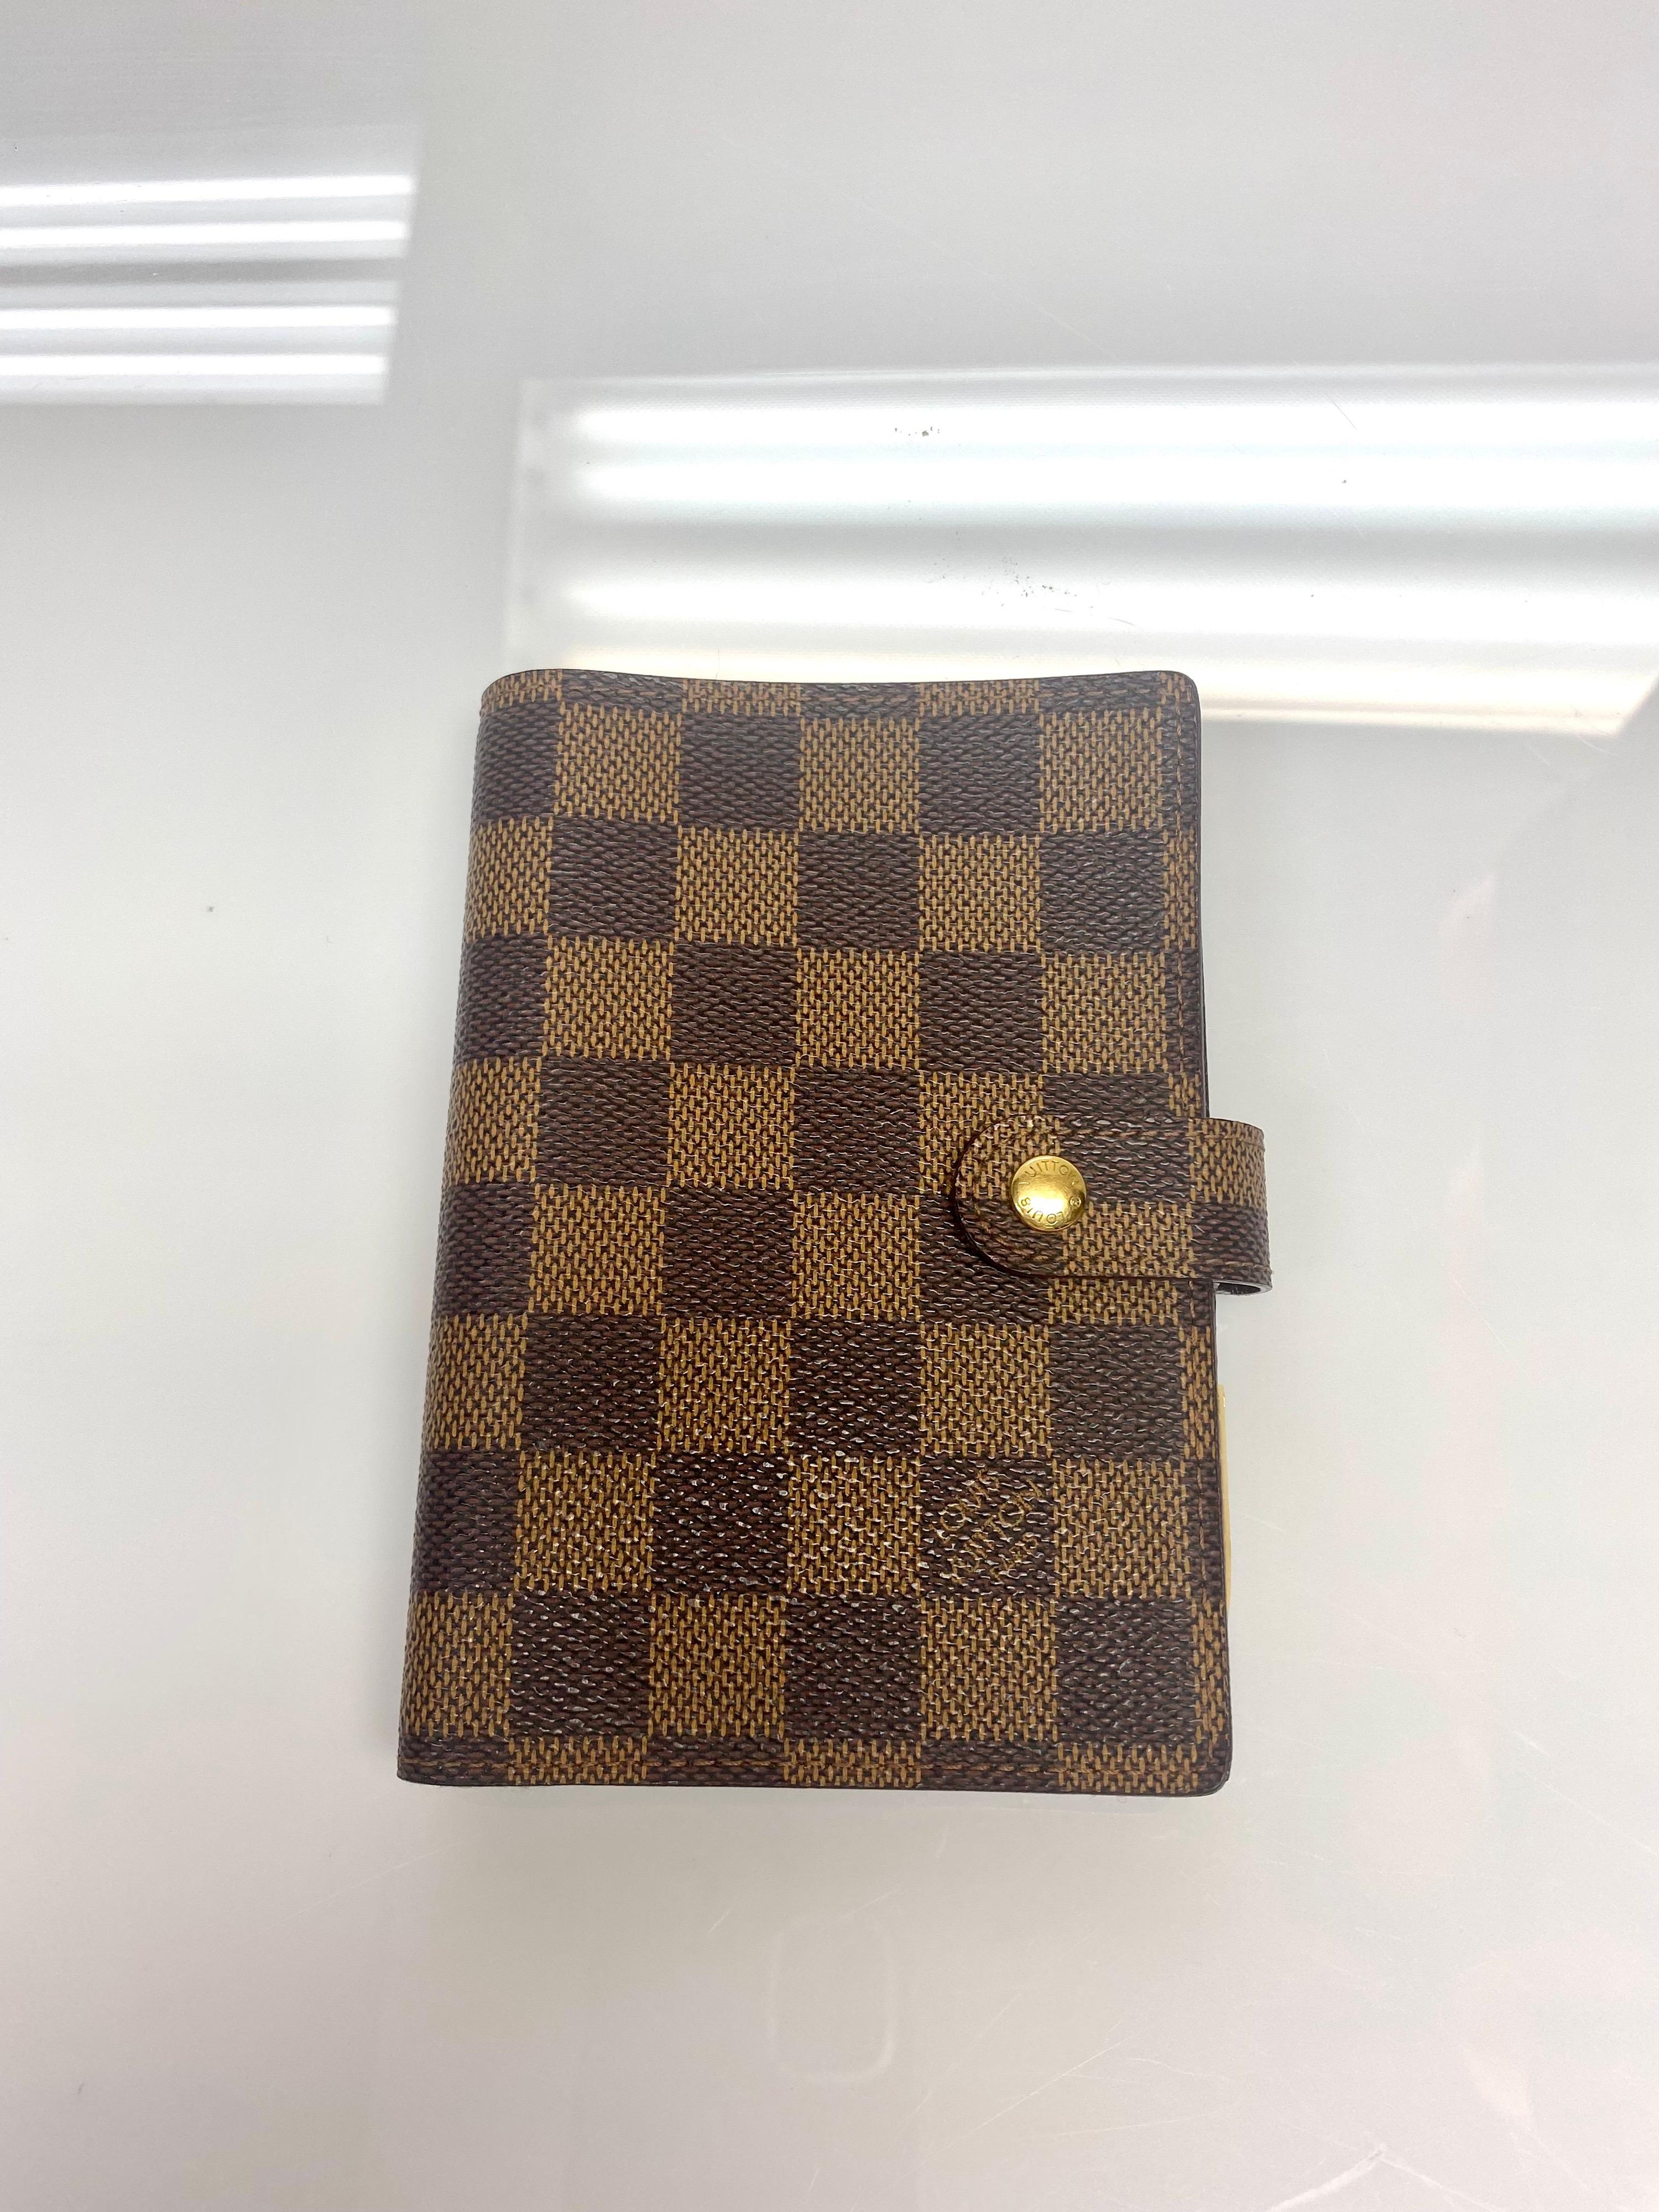 Louis Vuitton Brown Damier Print Agenda/Planner. Featuring the iconic Damier print in brown, gold hardware and accompanied by gold pen. Planner is for the year 2004. item is in excellent condition. 

Dimensions: 
W: 4